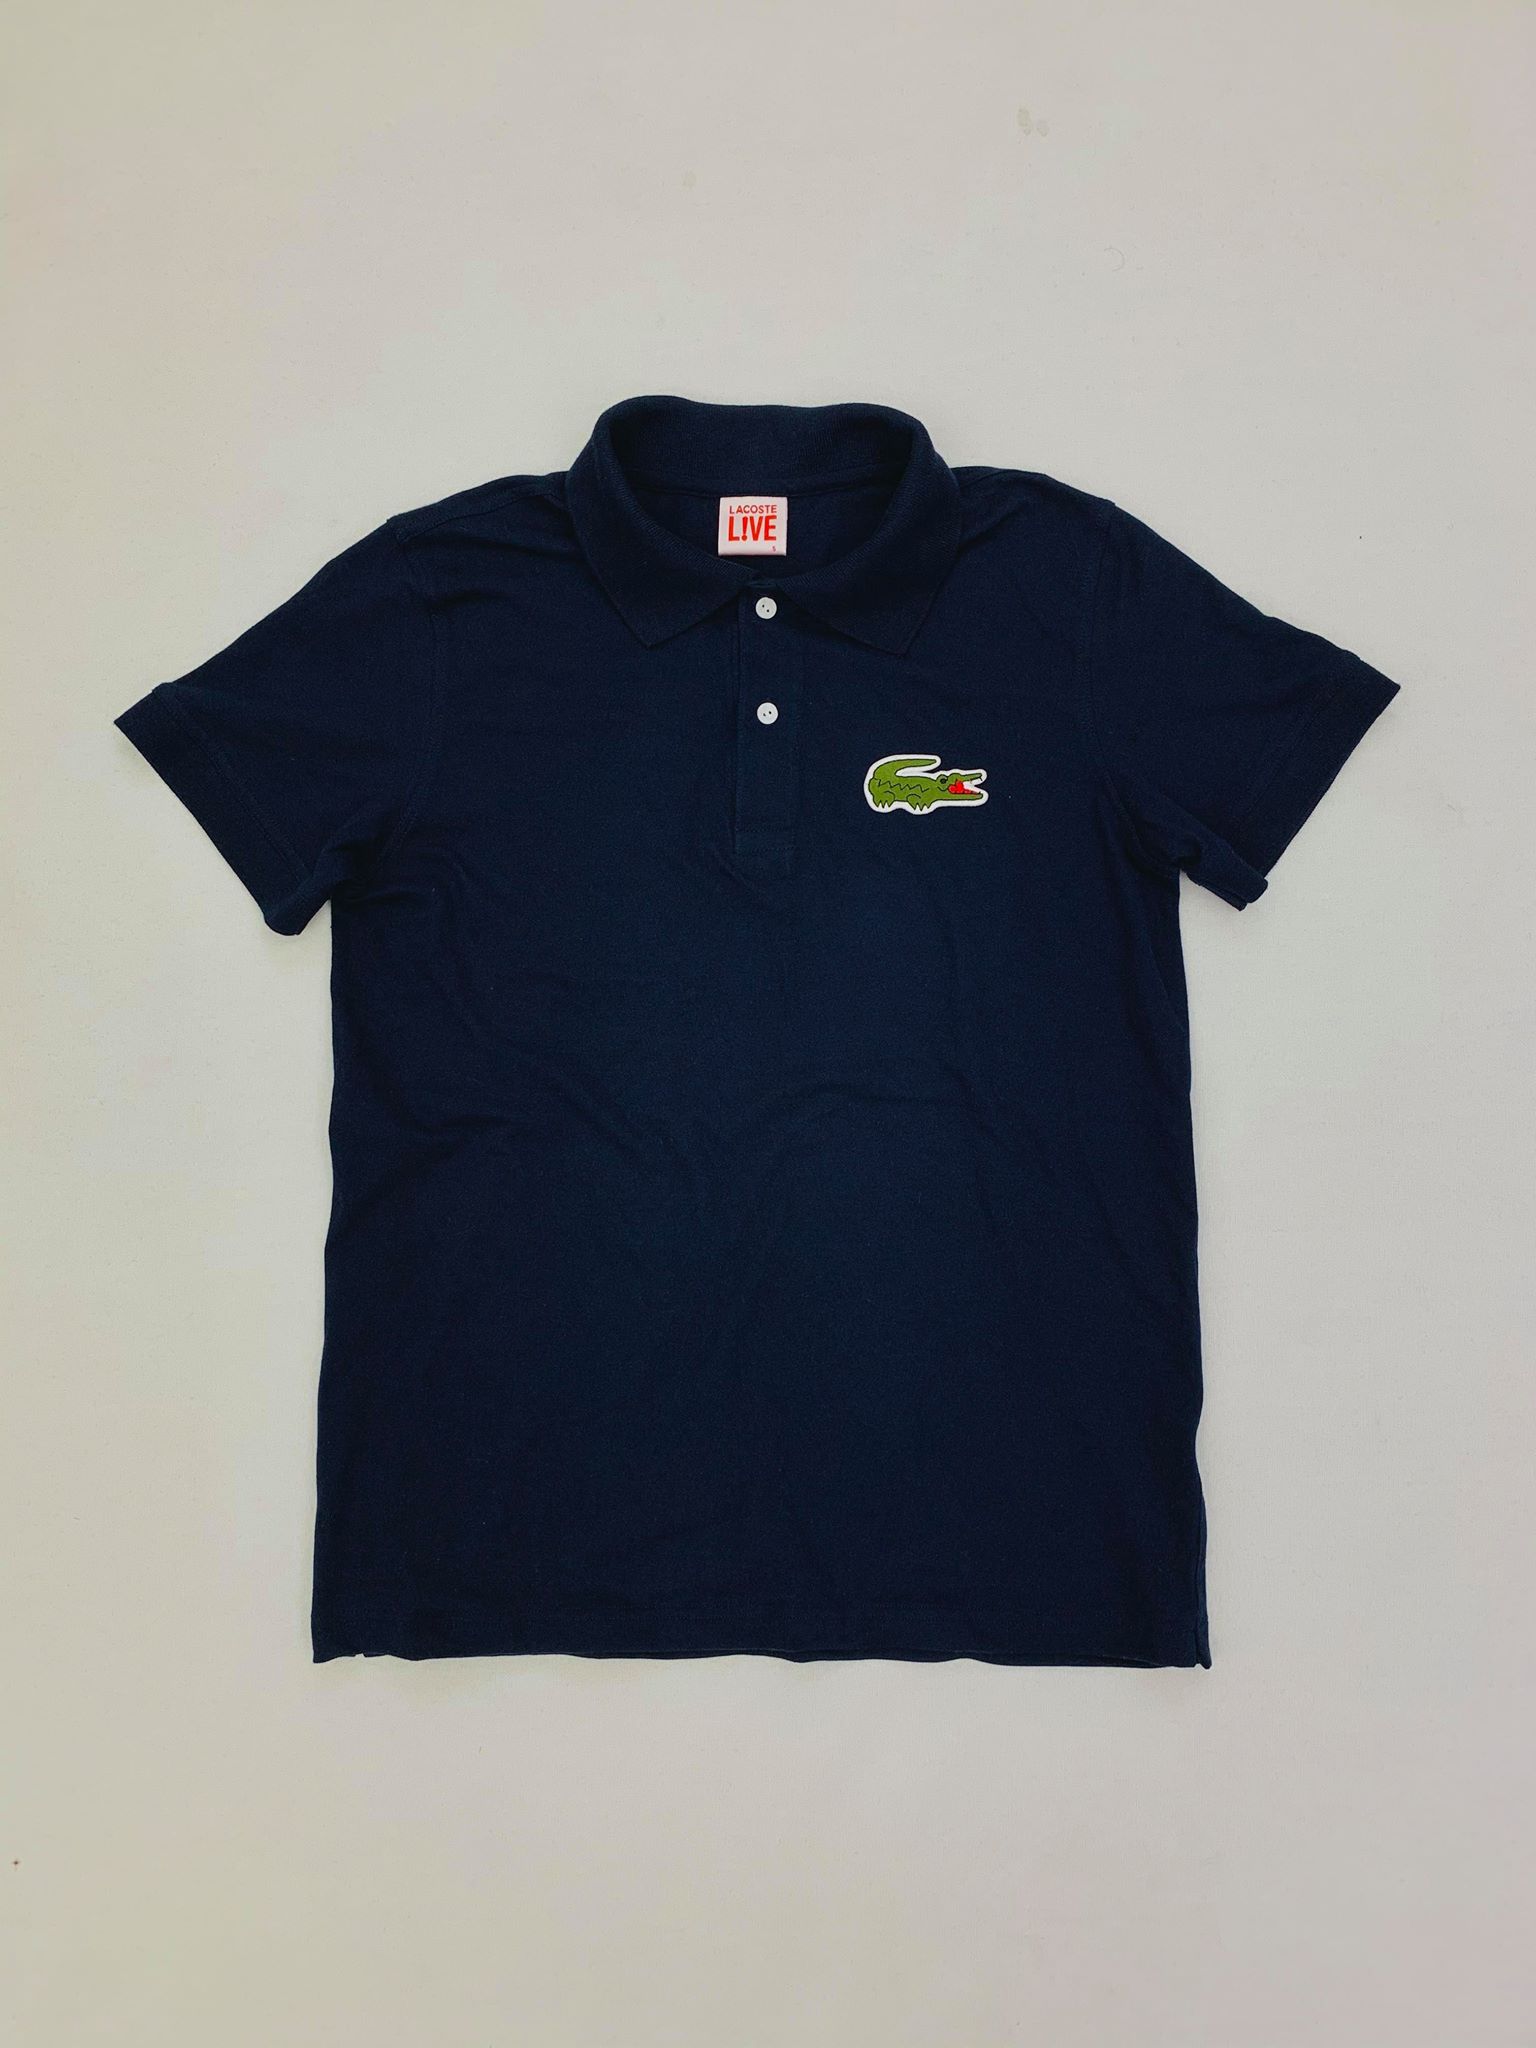 lacoste business shirts